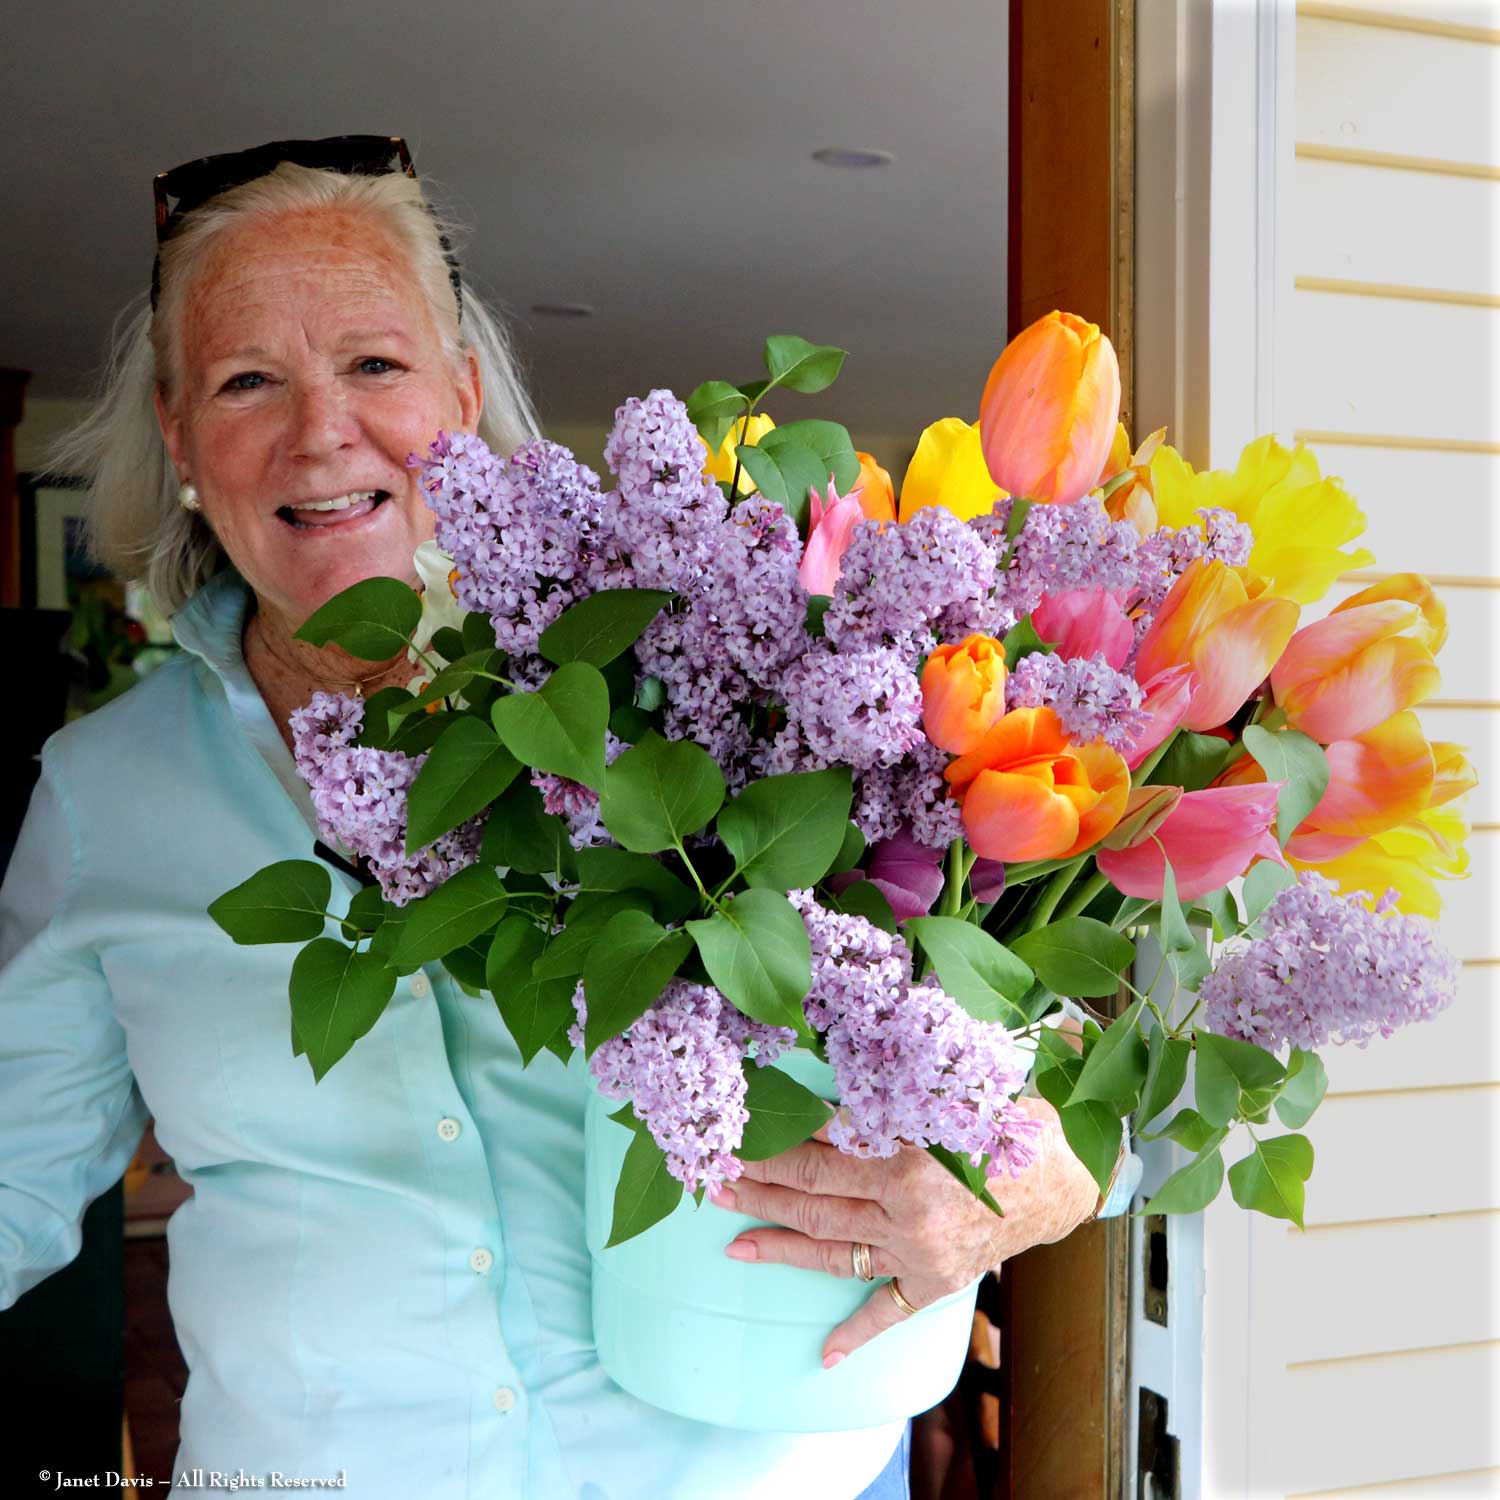 Kathleen Ladd with bouquet of lilacs and tulips from Shirley Williams's garden.